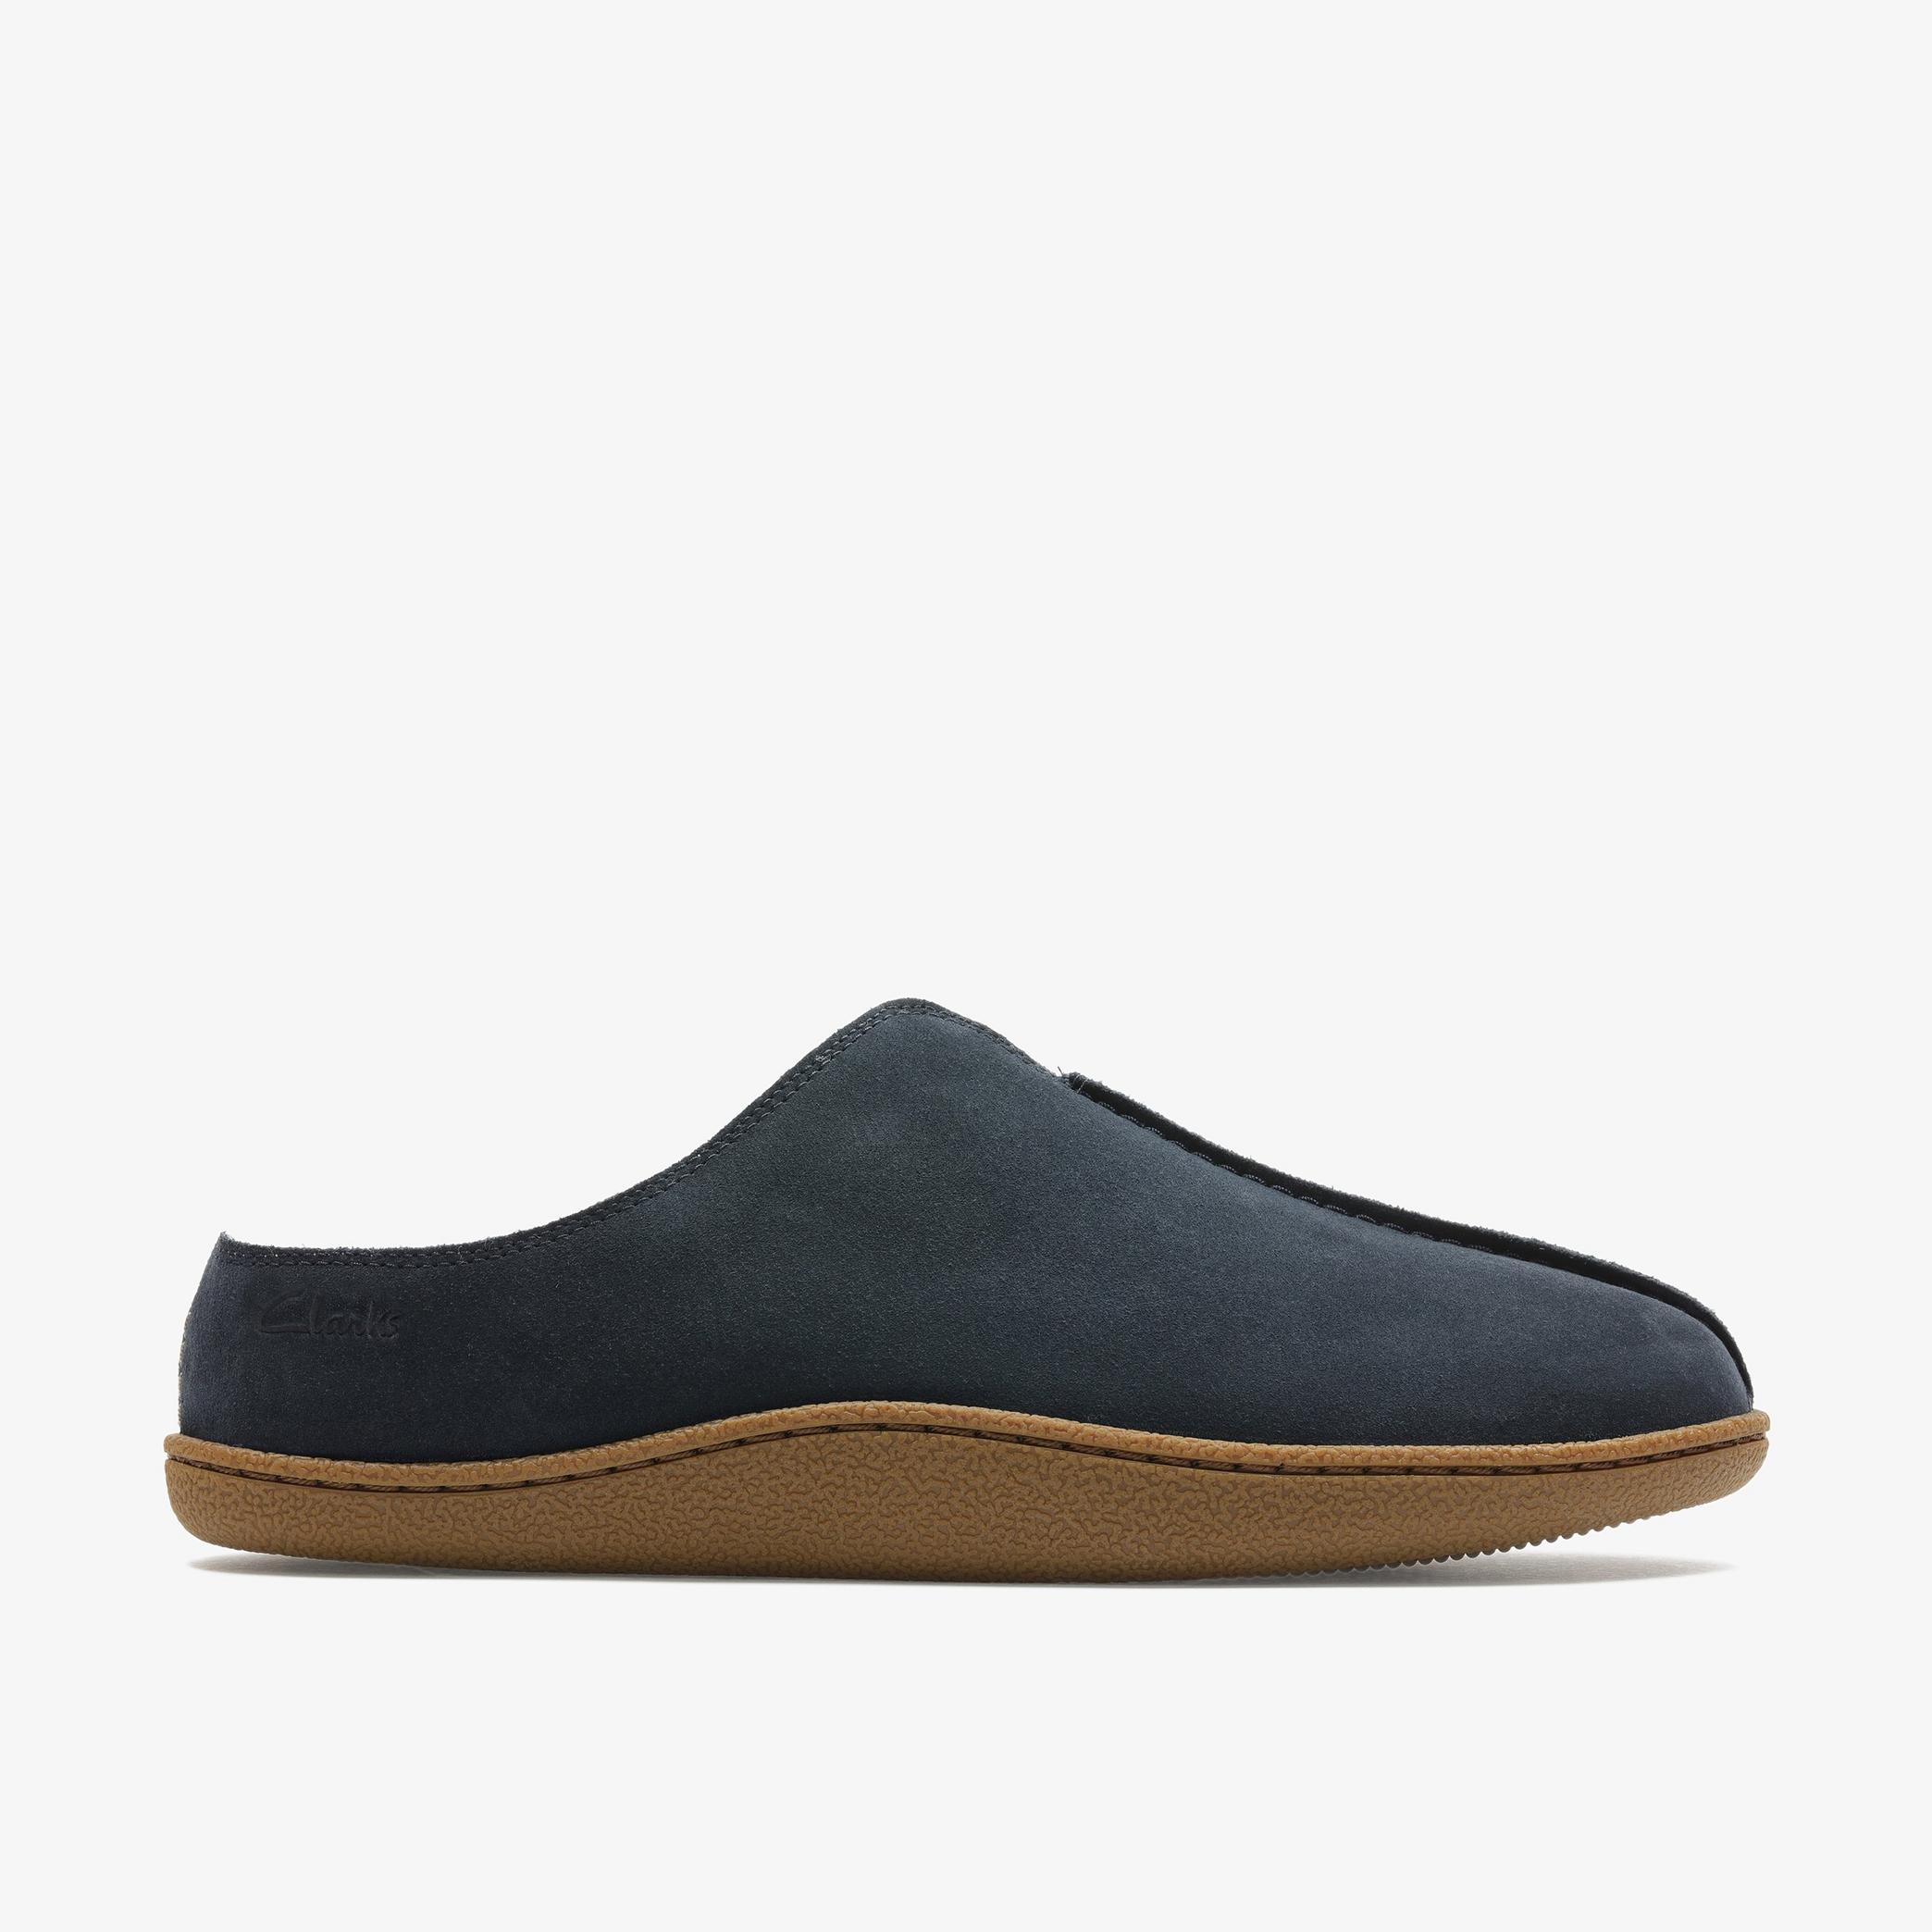 Home Mule Navy Suede Slippers, view 1 of 6